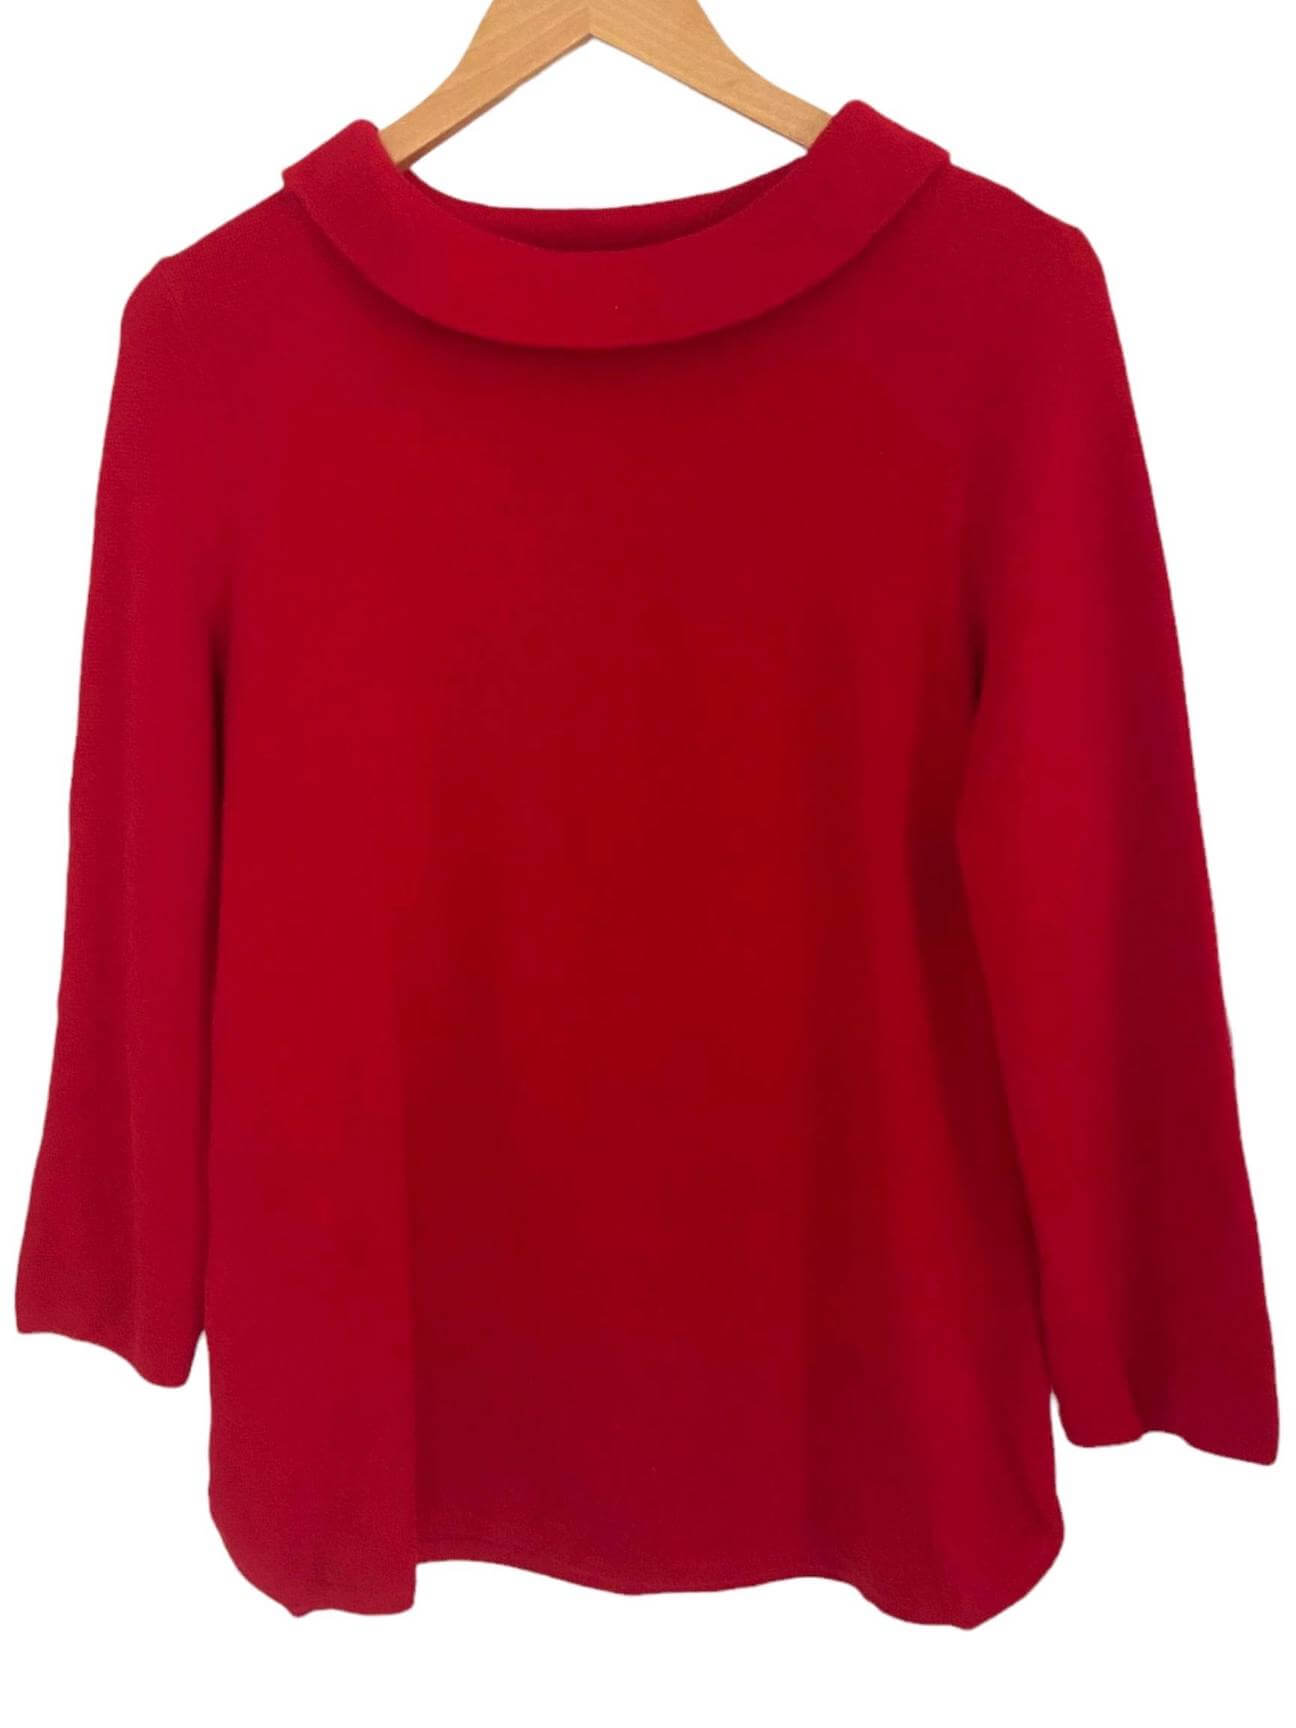 Cool Winter TALBOTS red sweater